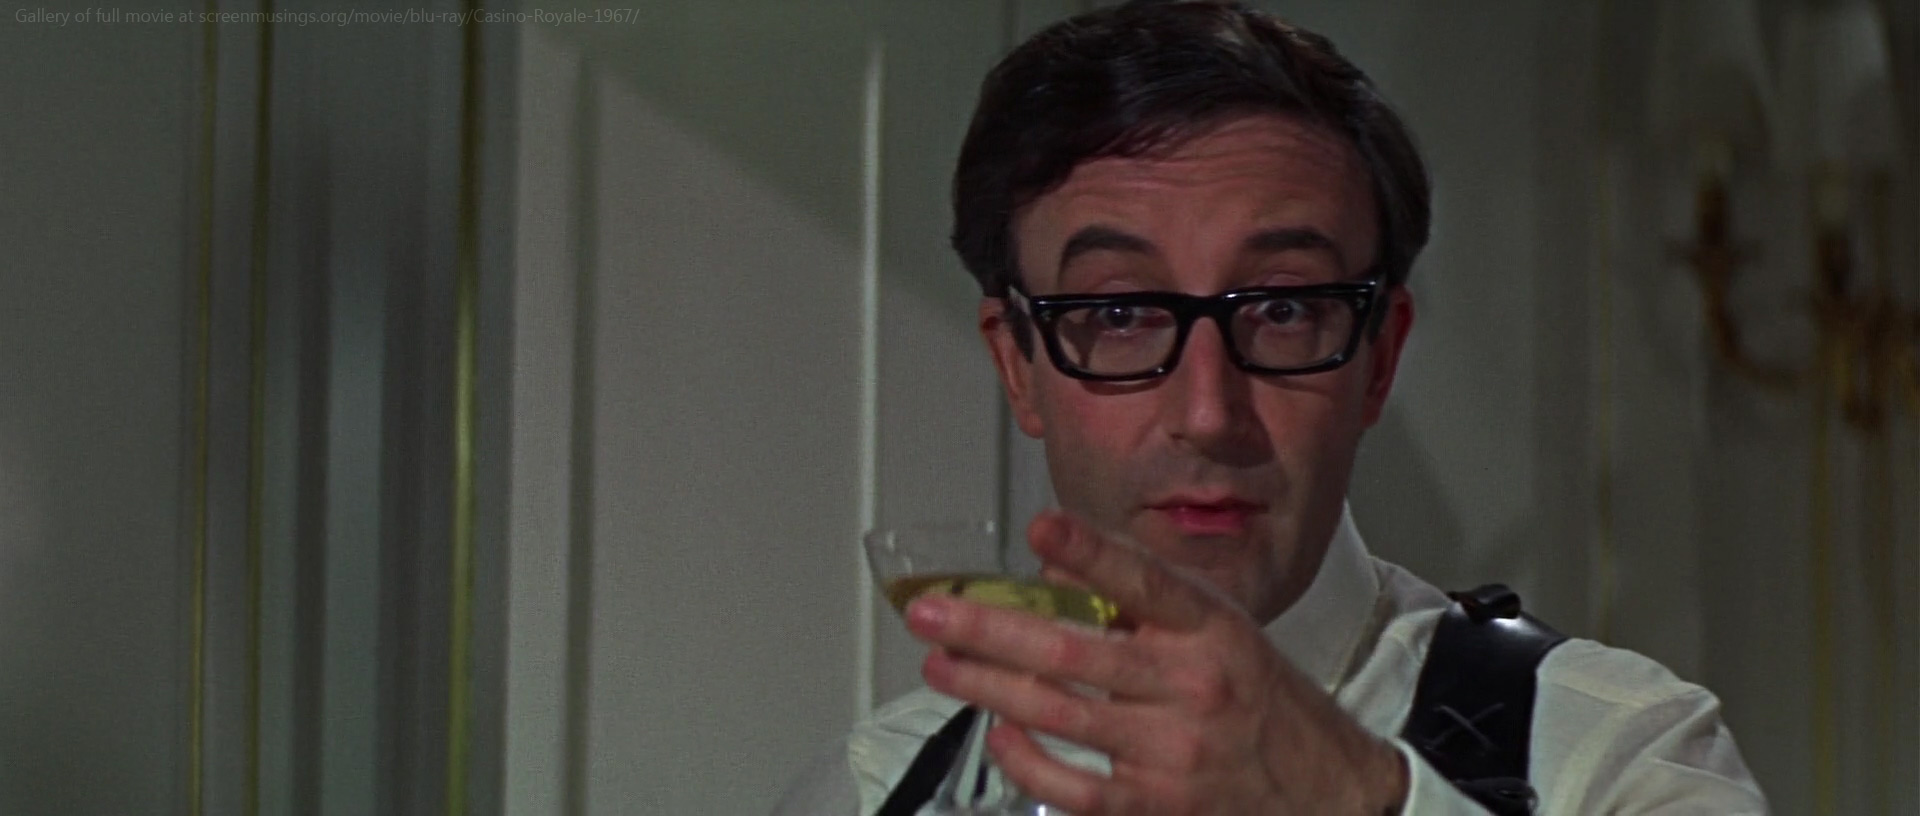 casino royale peter sellers cast